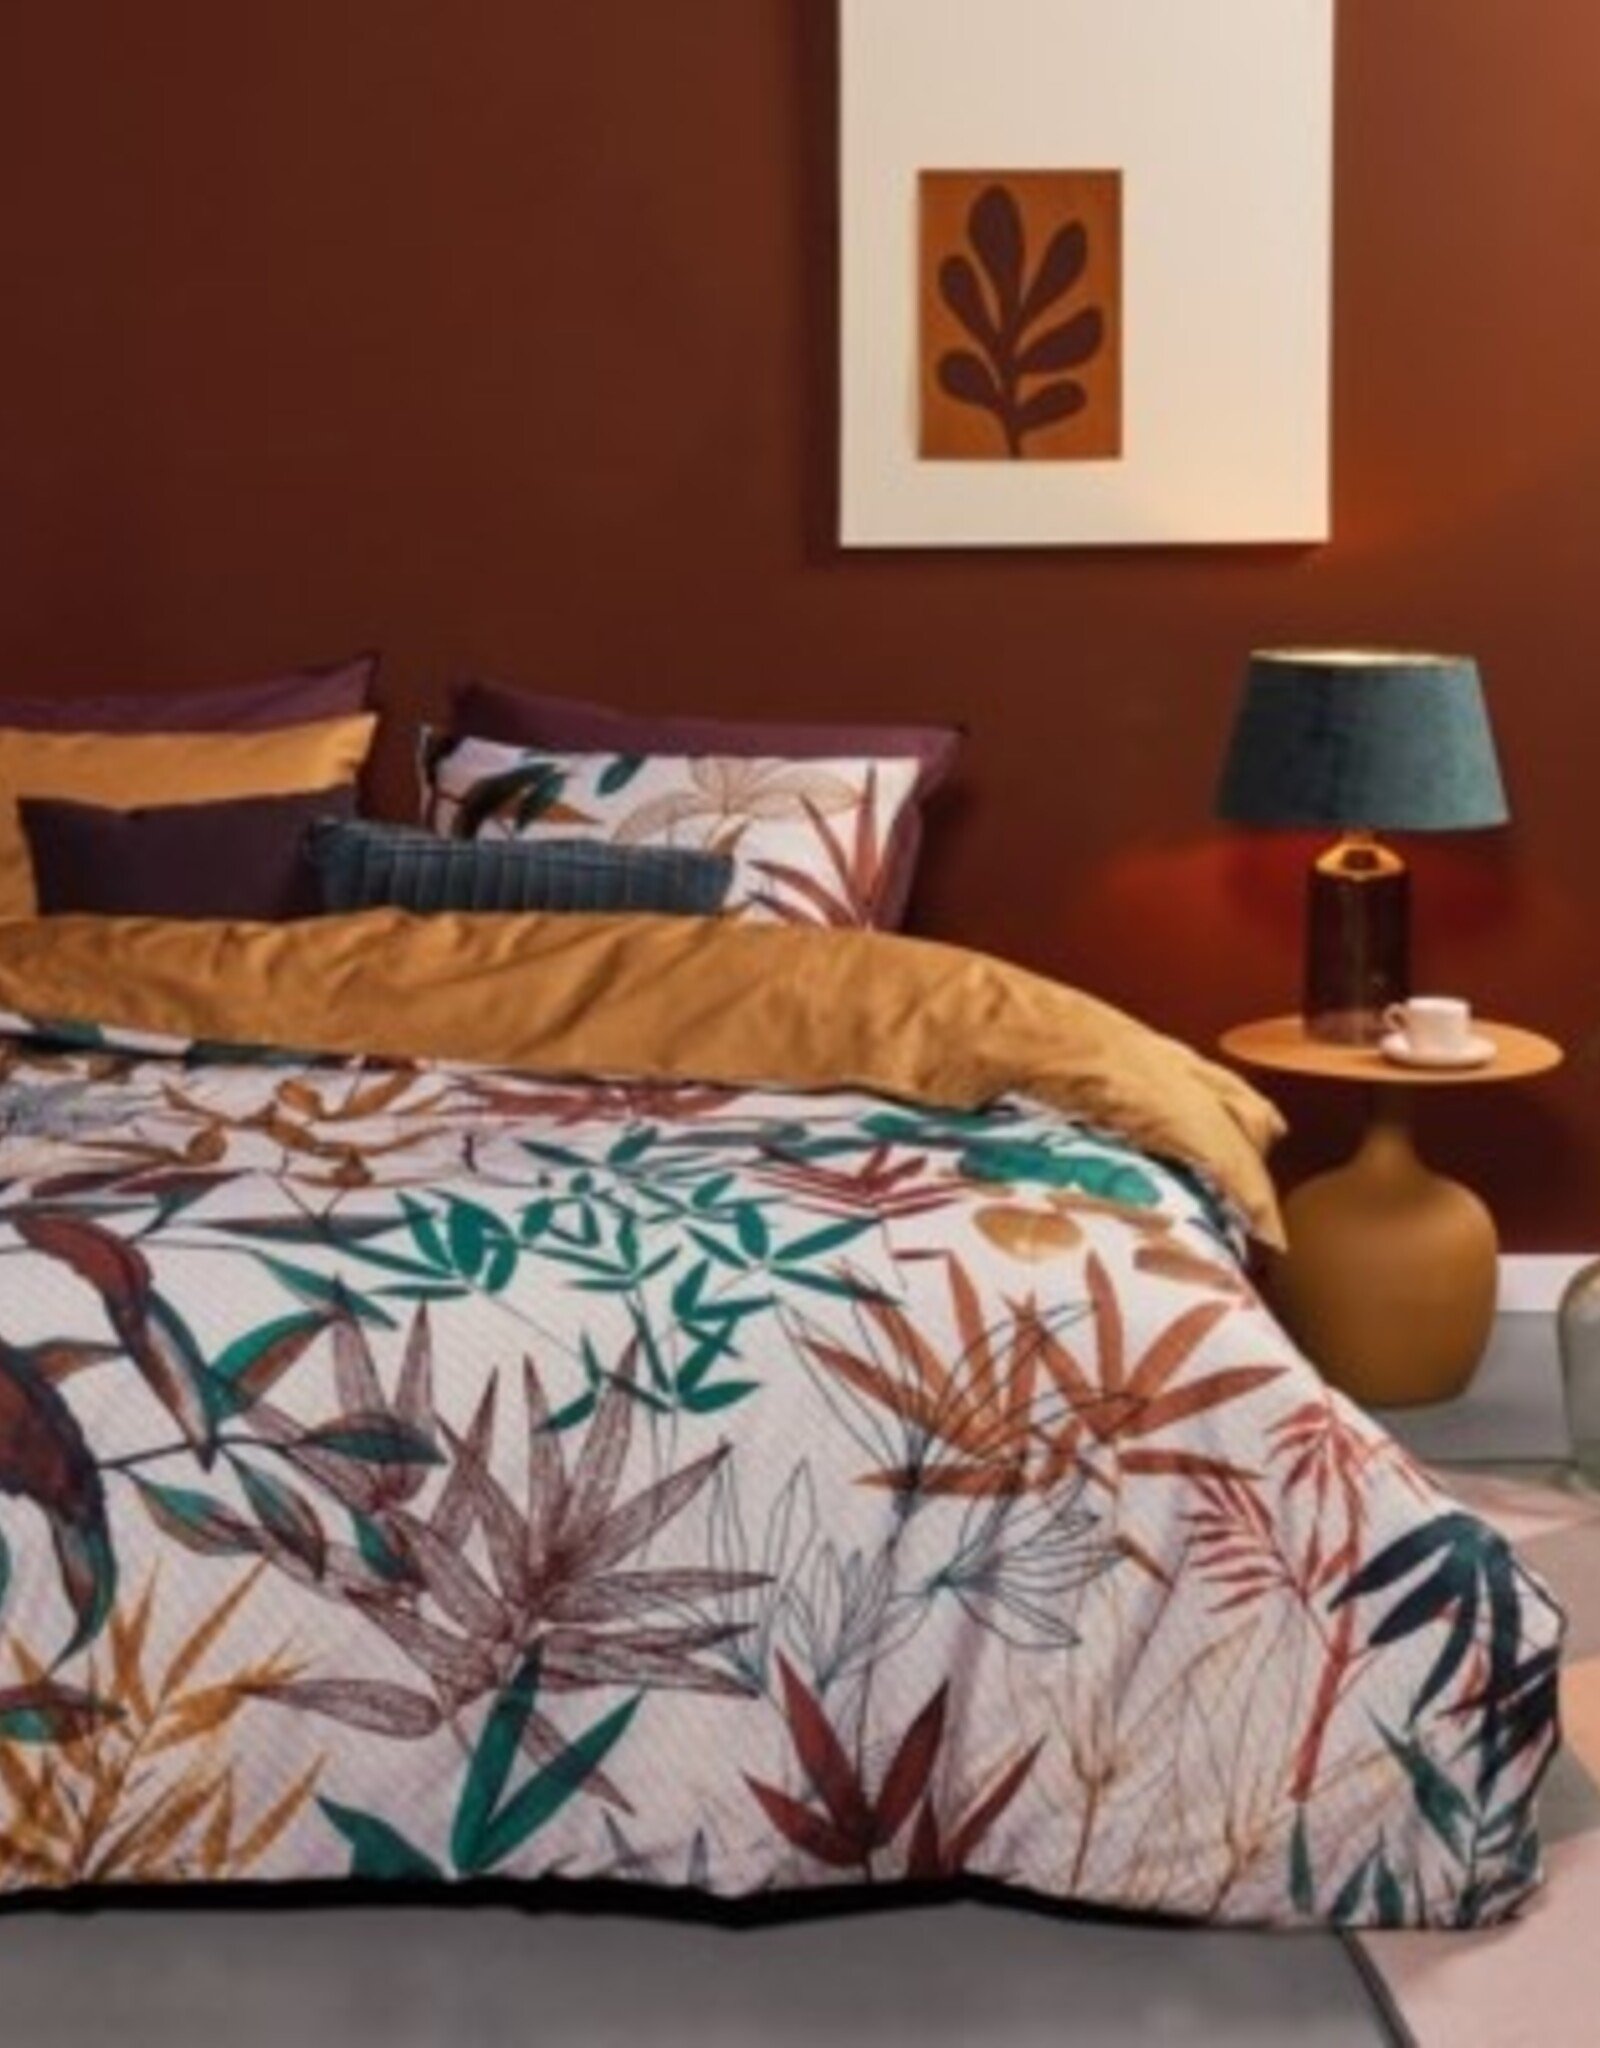 Duvet Cover Brunelli Cannelle Printed Foliage King Cover w/ 2 Shams